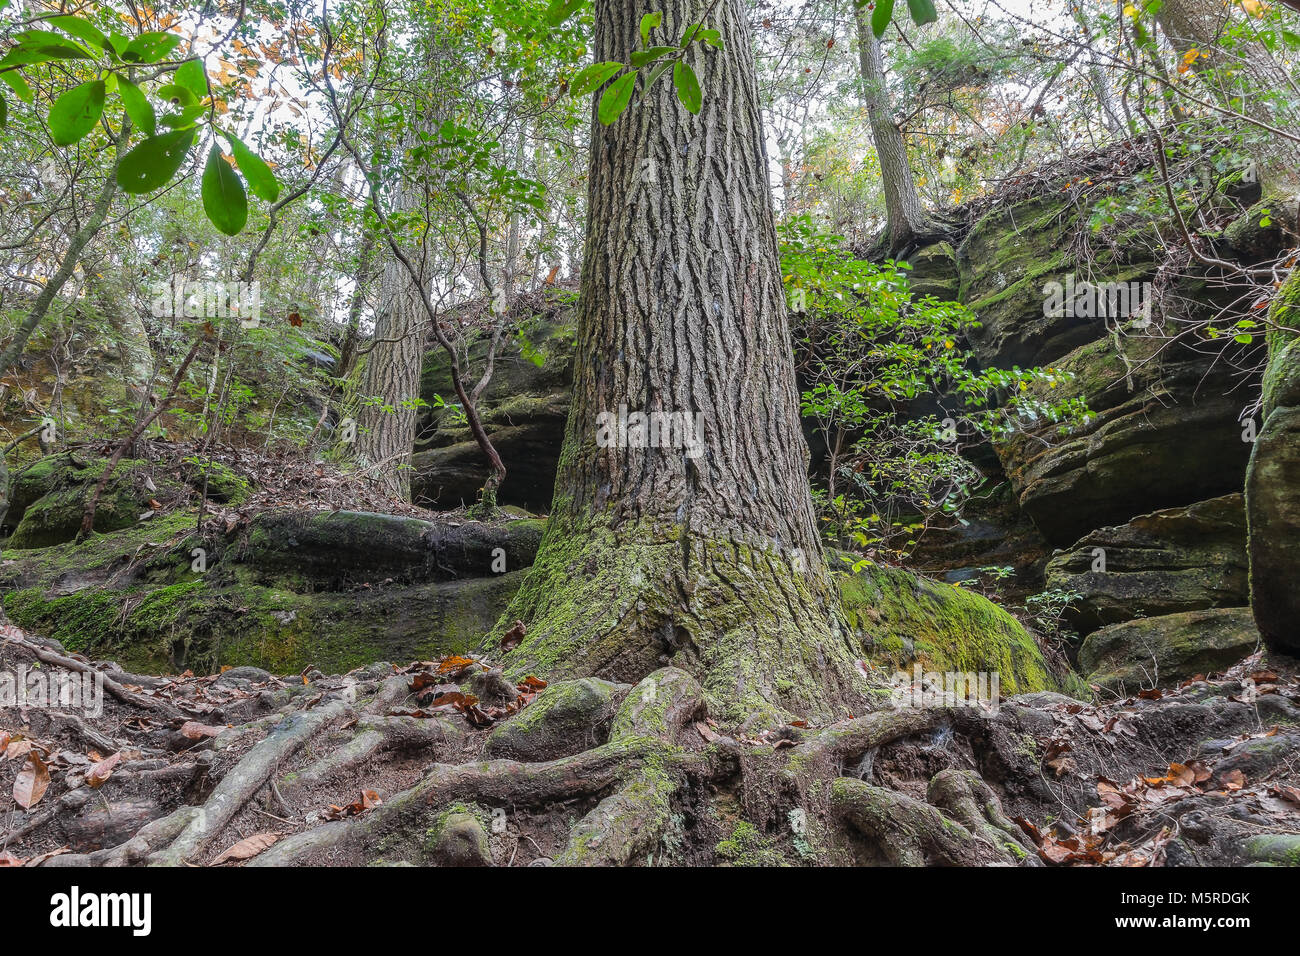 A close up of the root system of a very large fir tree at Dismals Canyon in Franklin County, Alabama. Stock Photo